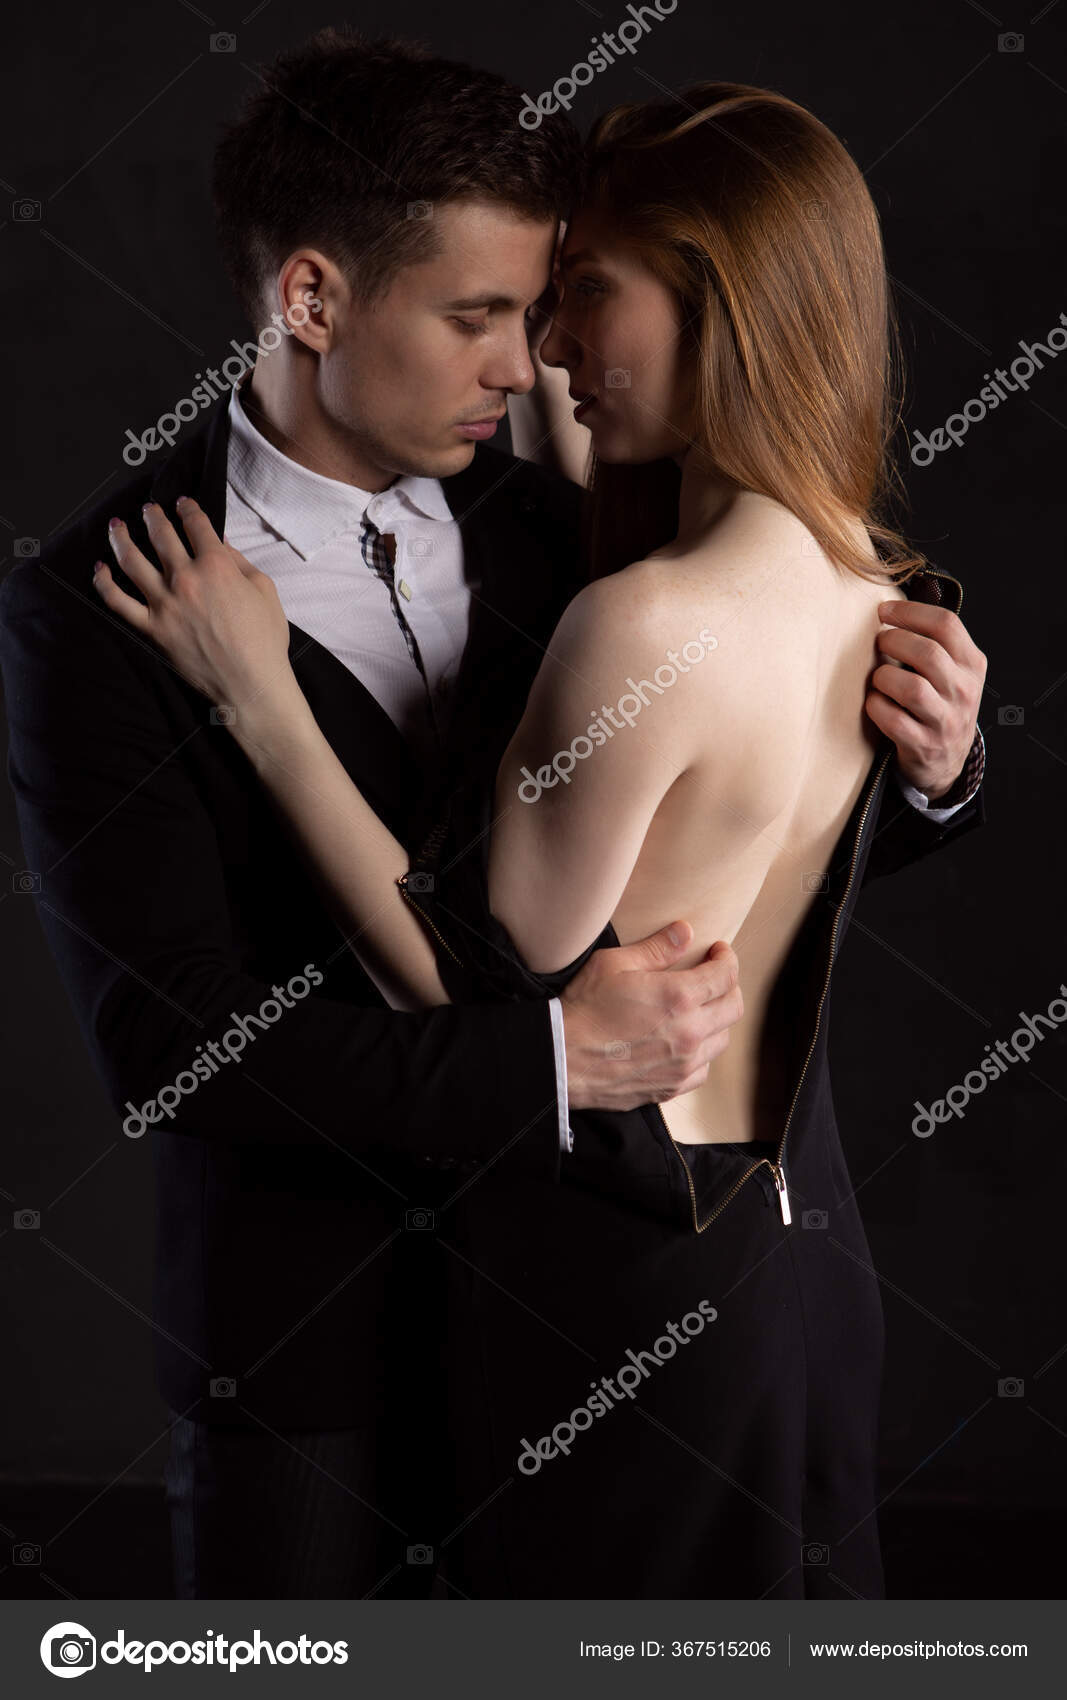 Handsome Man Concentrating Taking Dress Sexy Girl Who Gently Embracing Stock Photo by ©IvanovDenis43 367515206 hq nude image